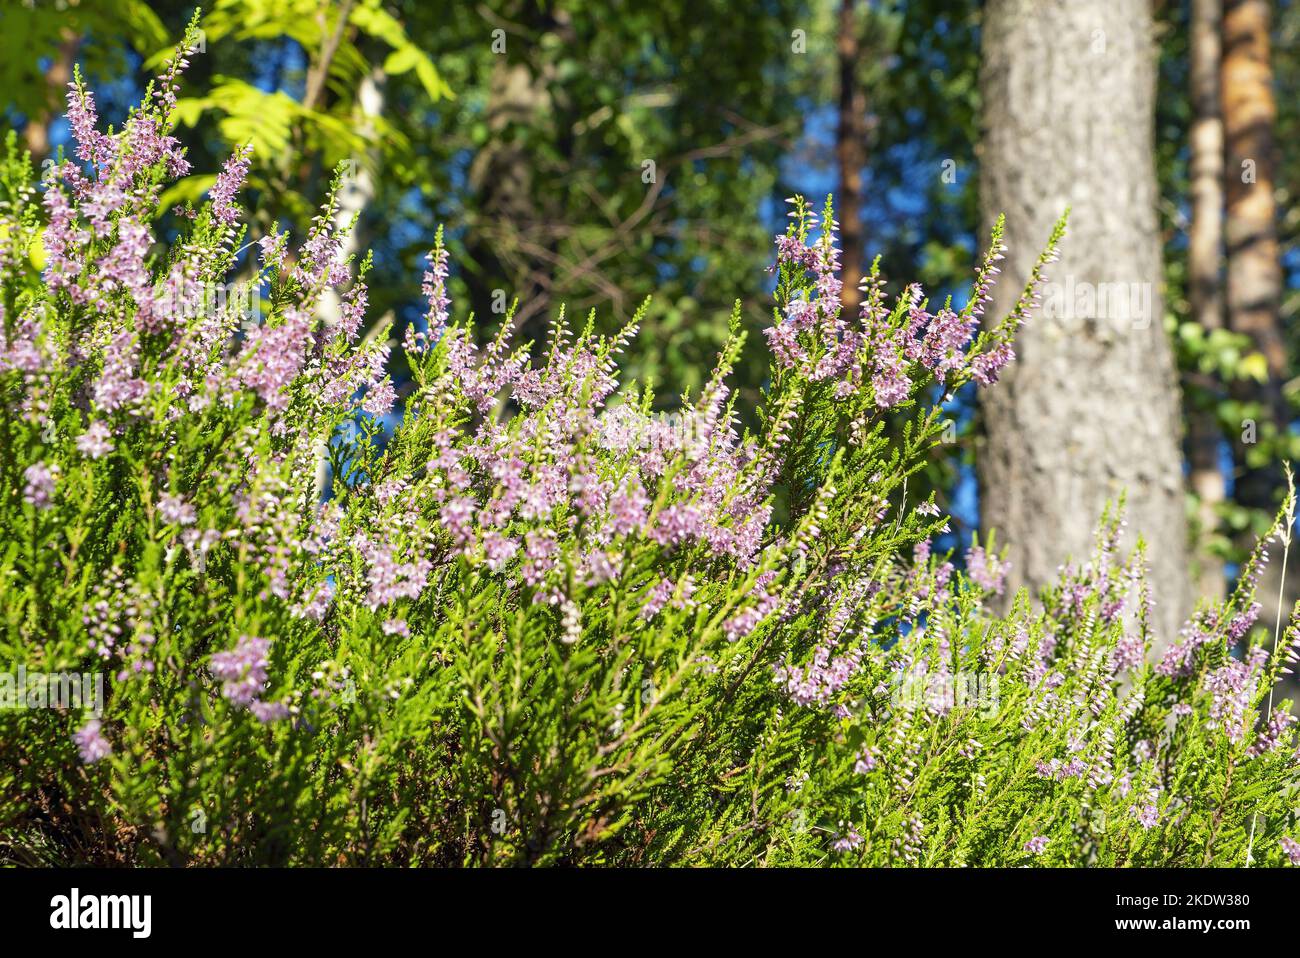 Blooming heather in a clearing in a pine forest. Stock Photo